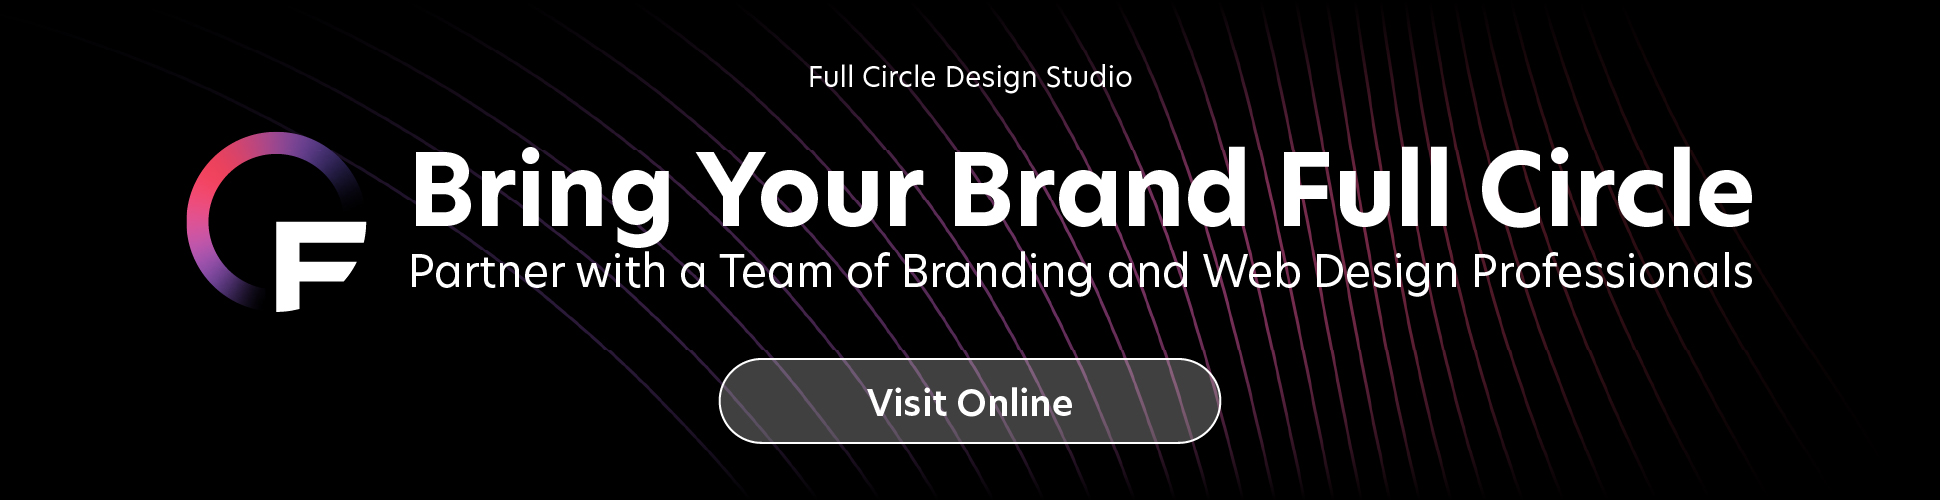 Full Circle Design Studio Ad: Bring Your Brand Full Circle; Partner with a Team of branding and Web Design Professionals